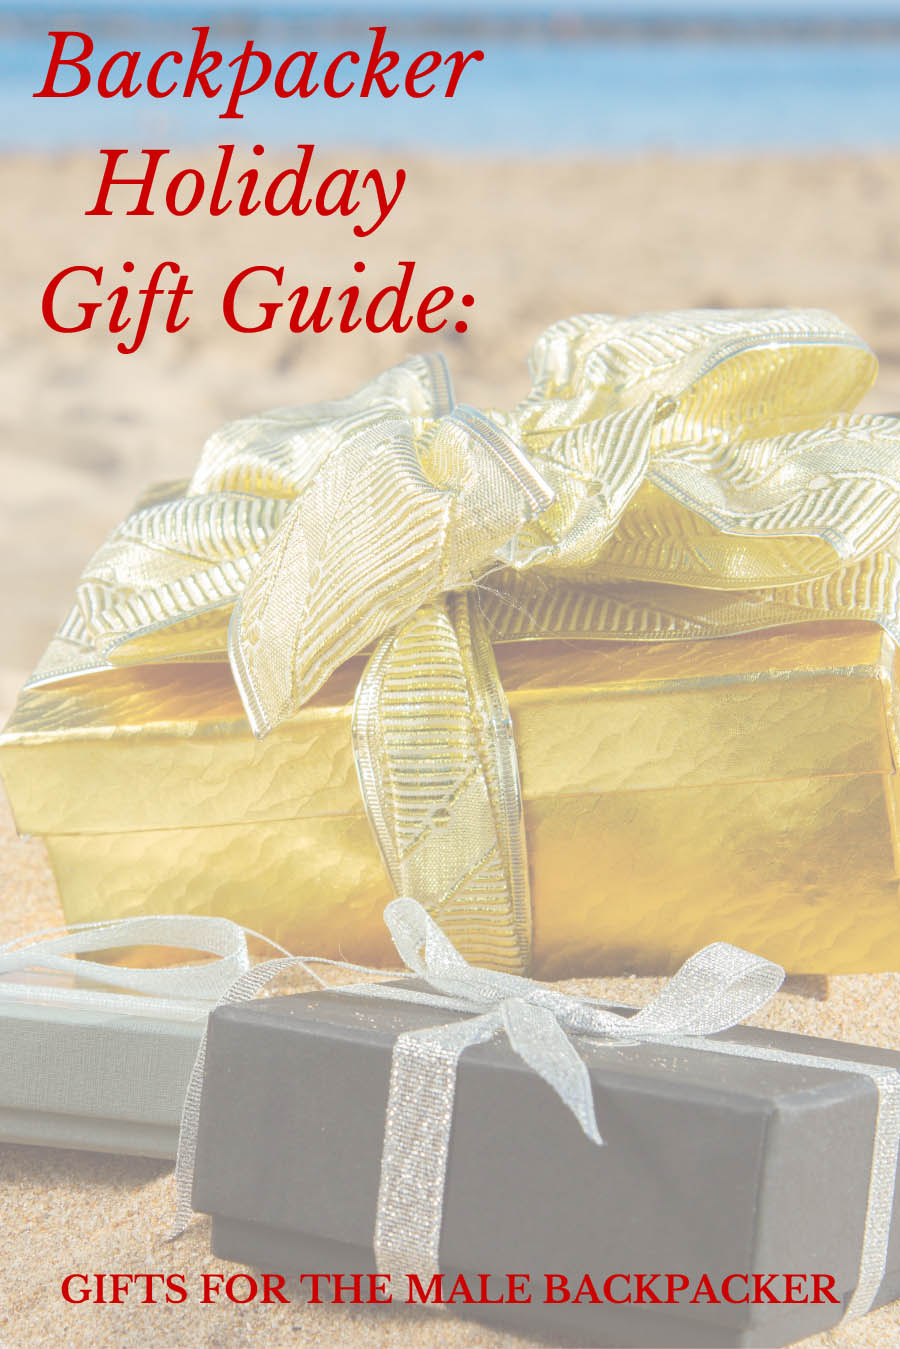 Backpacker Holiday Gift Guide: Gifts for the Male Backpacker